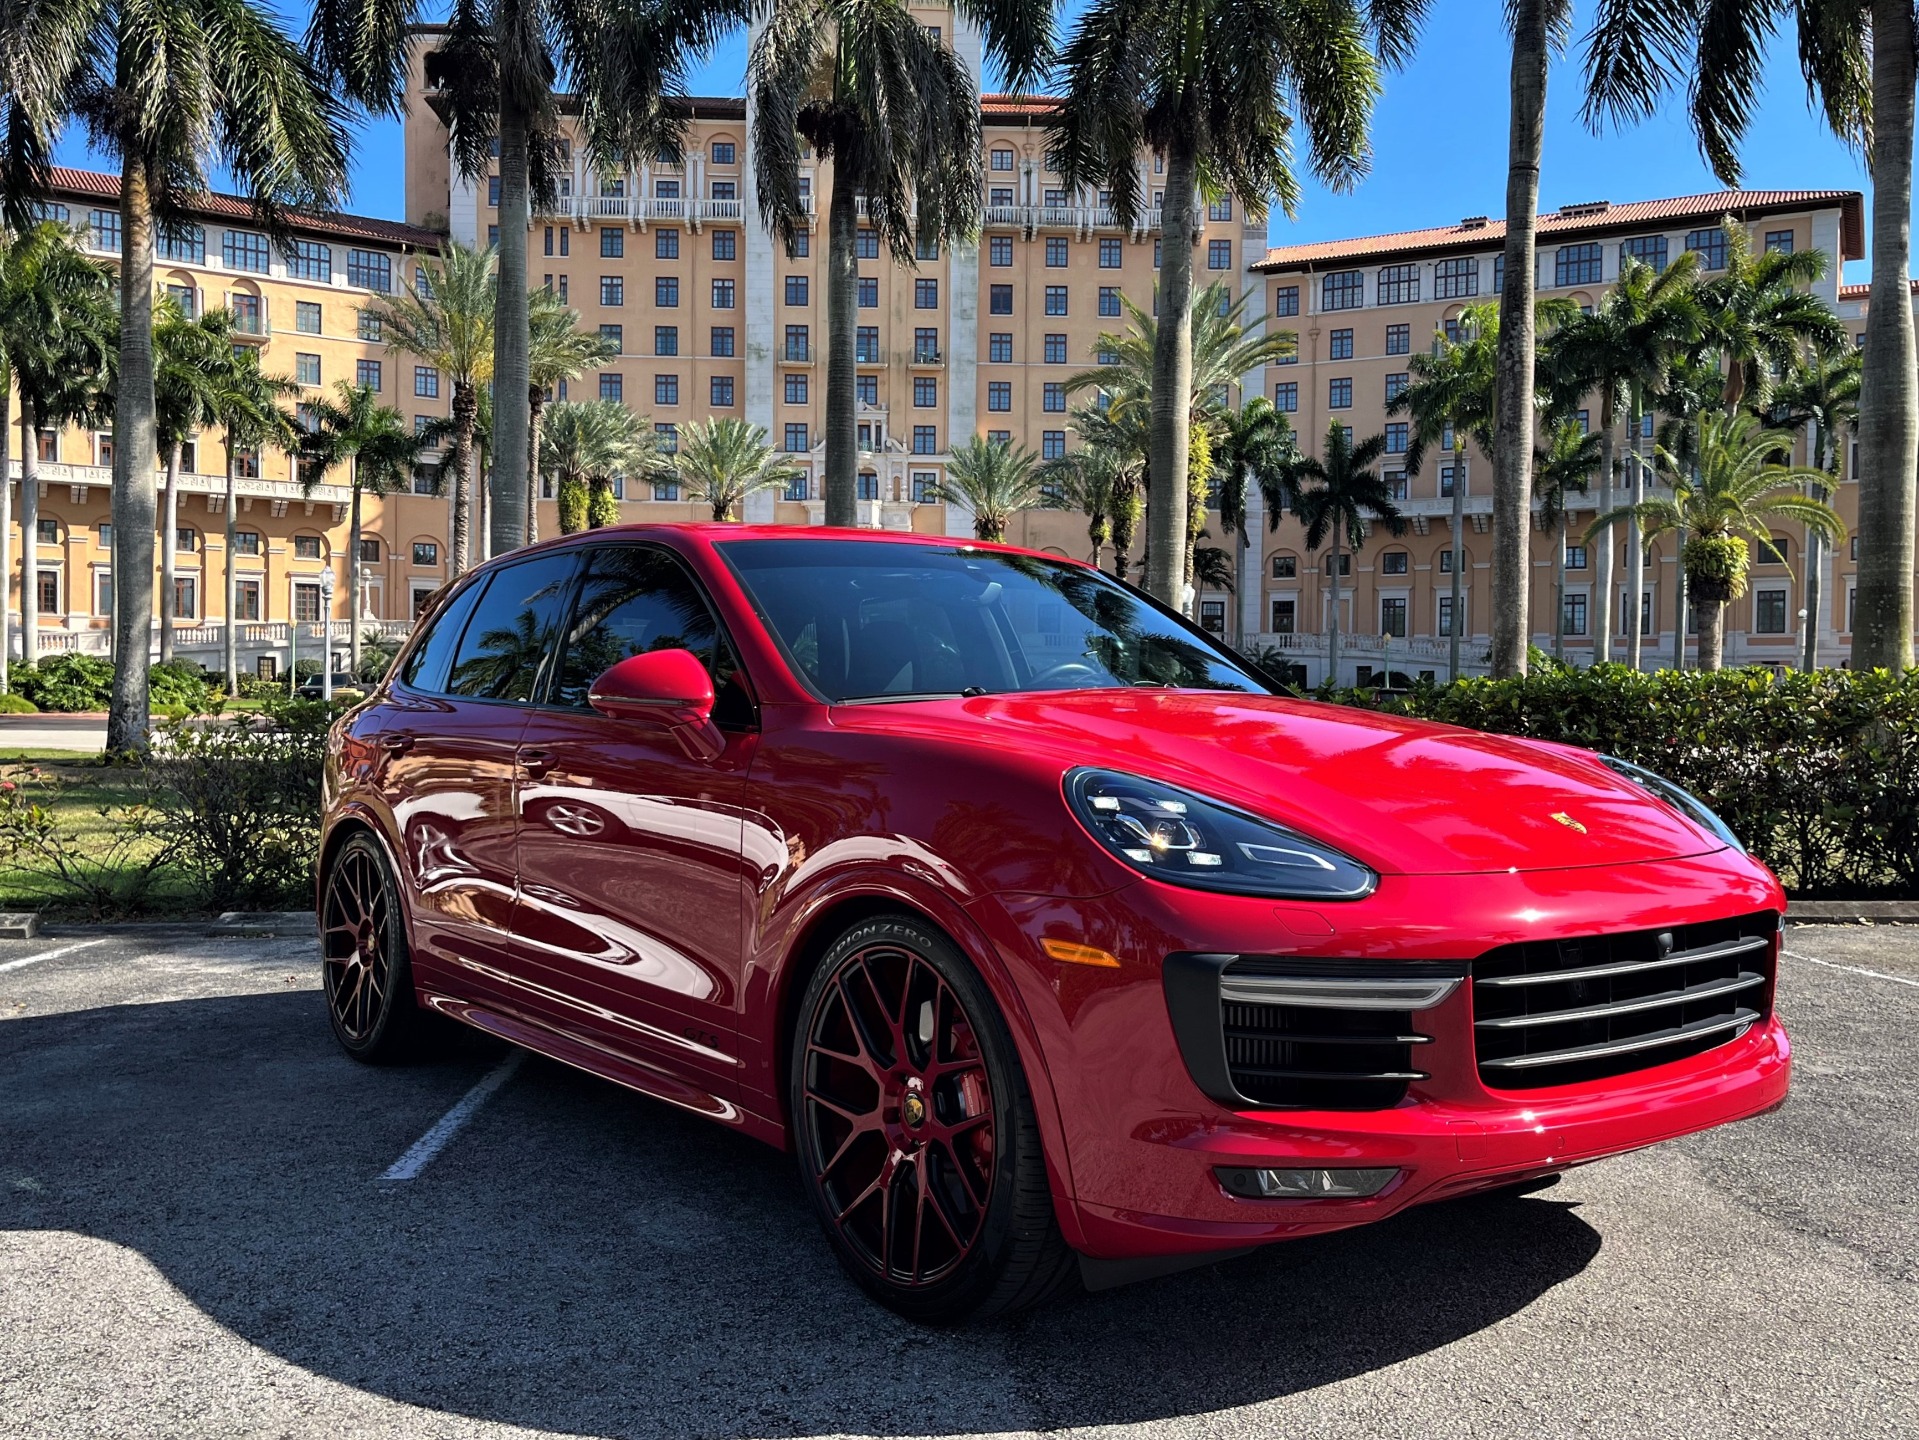 Used 2017 Porsche Cayenne GTS for sale $88,850 at The Gables Sports Cars in Miami FL 33146 1